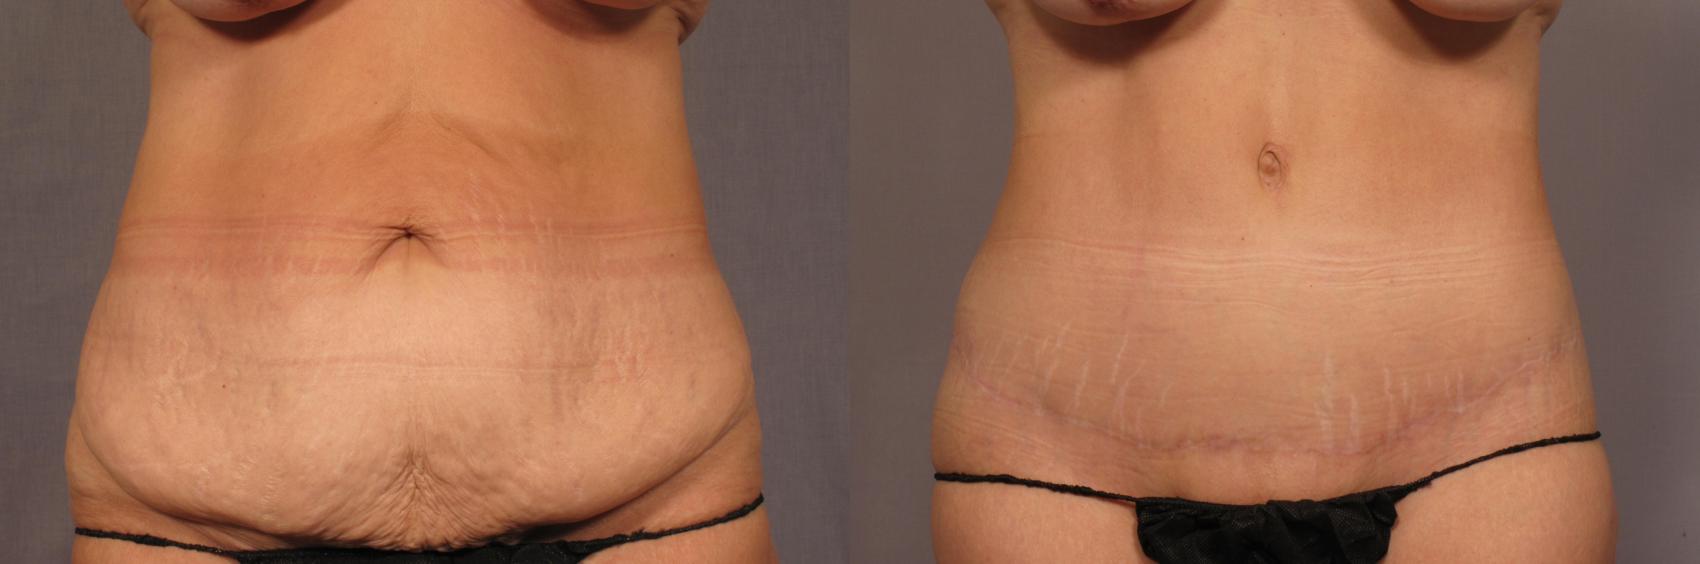 Before and After Photo of Tummy Tuck with Liposuction in a 50 year old Naples, Florida woman by Dr. Kent V. Hasen